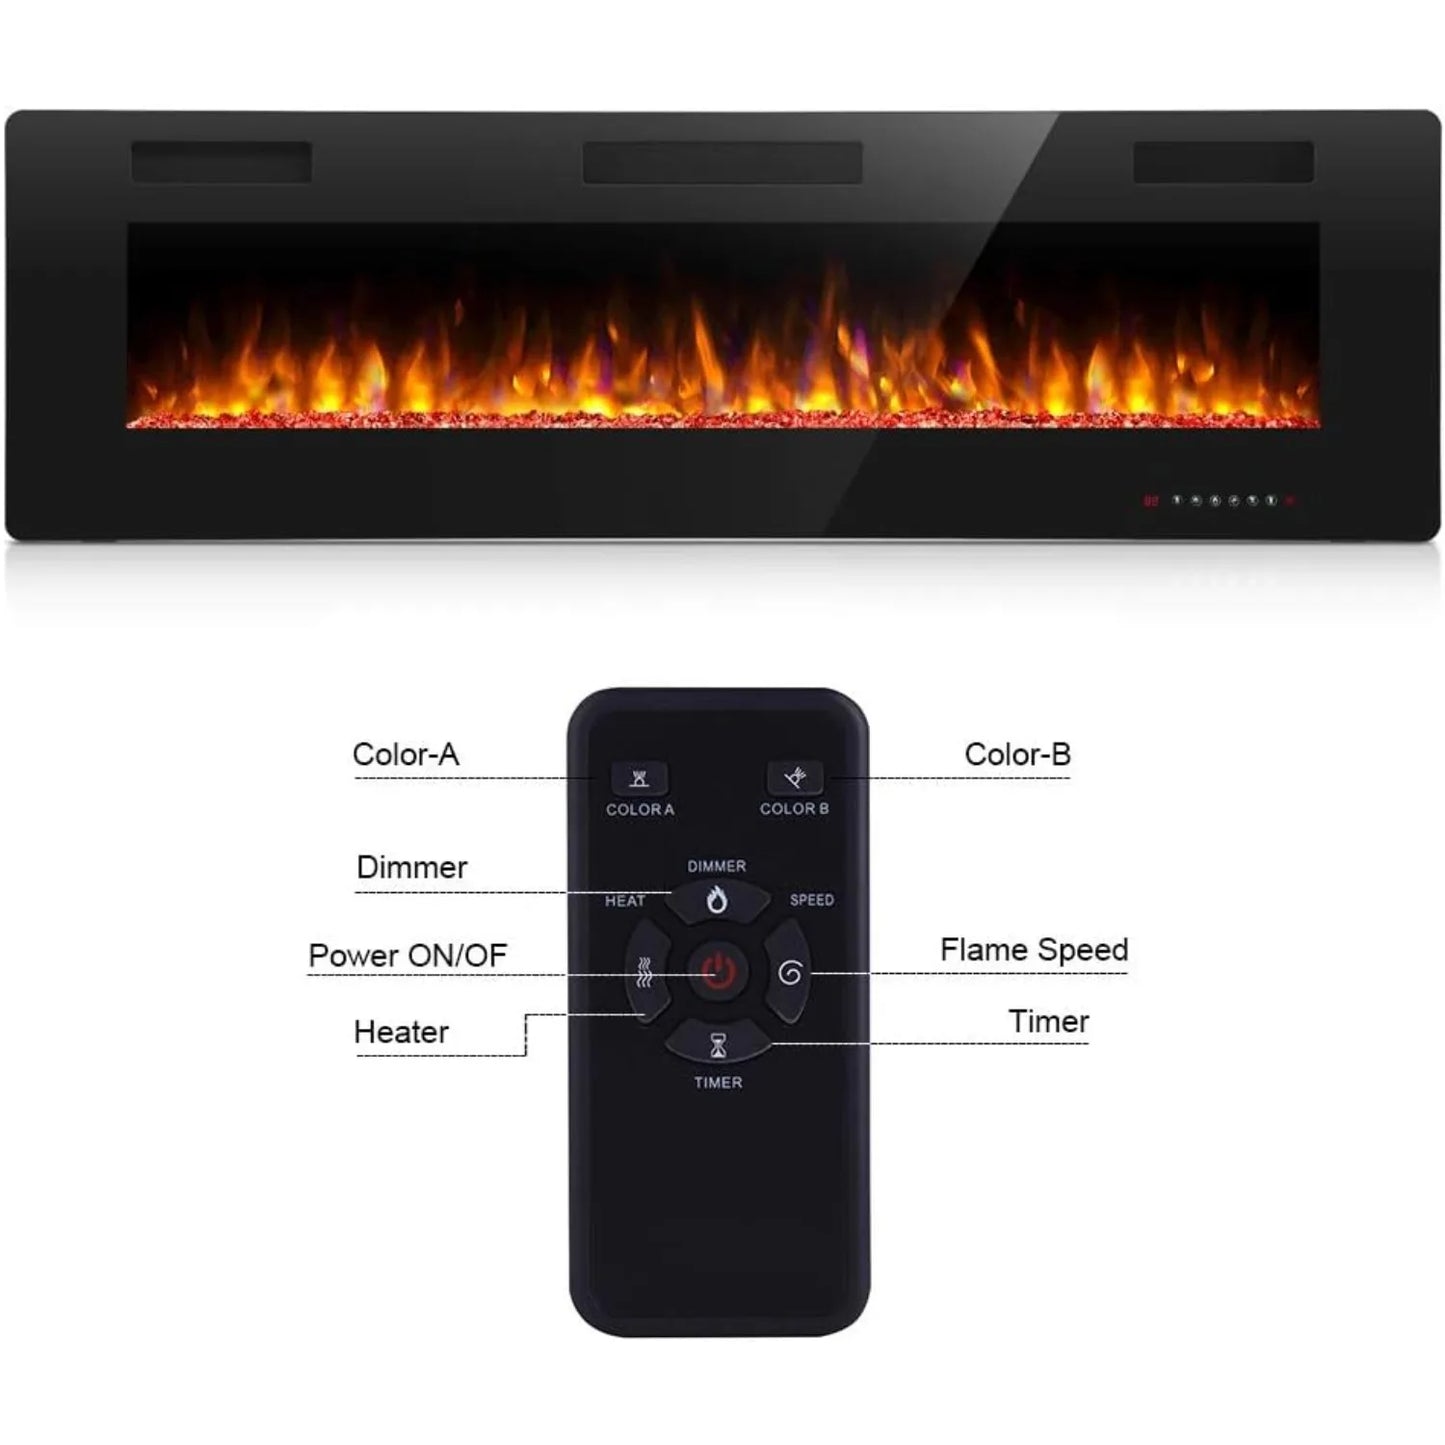 42 Inch Electric Fireplace in-Wall Recessed & Wall Mounted
Linear Fireplace w/ Multicolor Flame
Control by Touch Panel & Remote